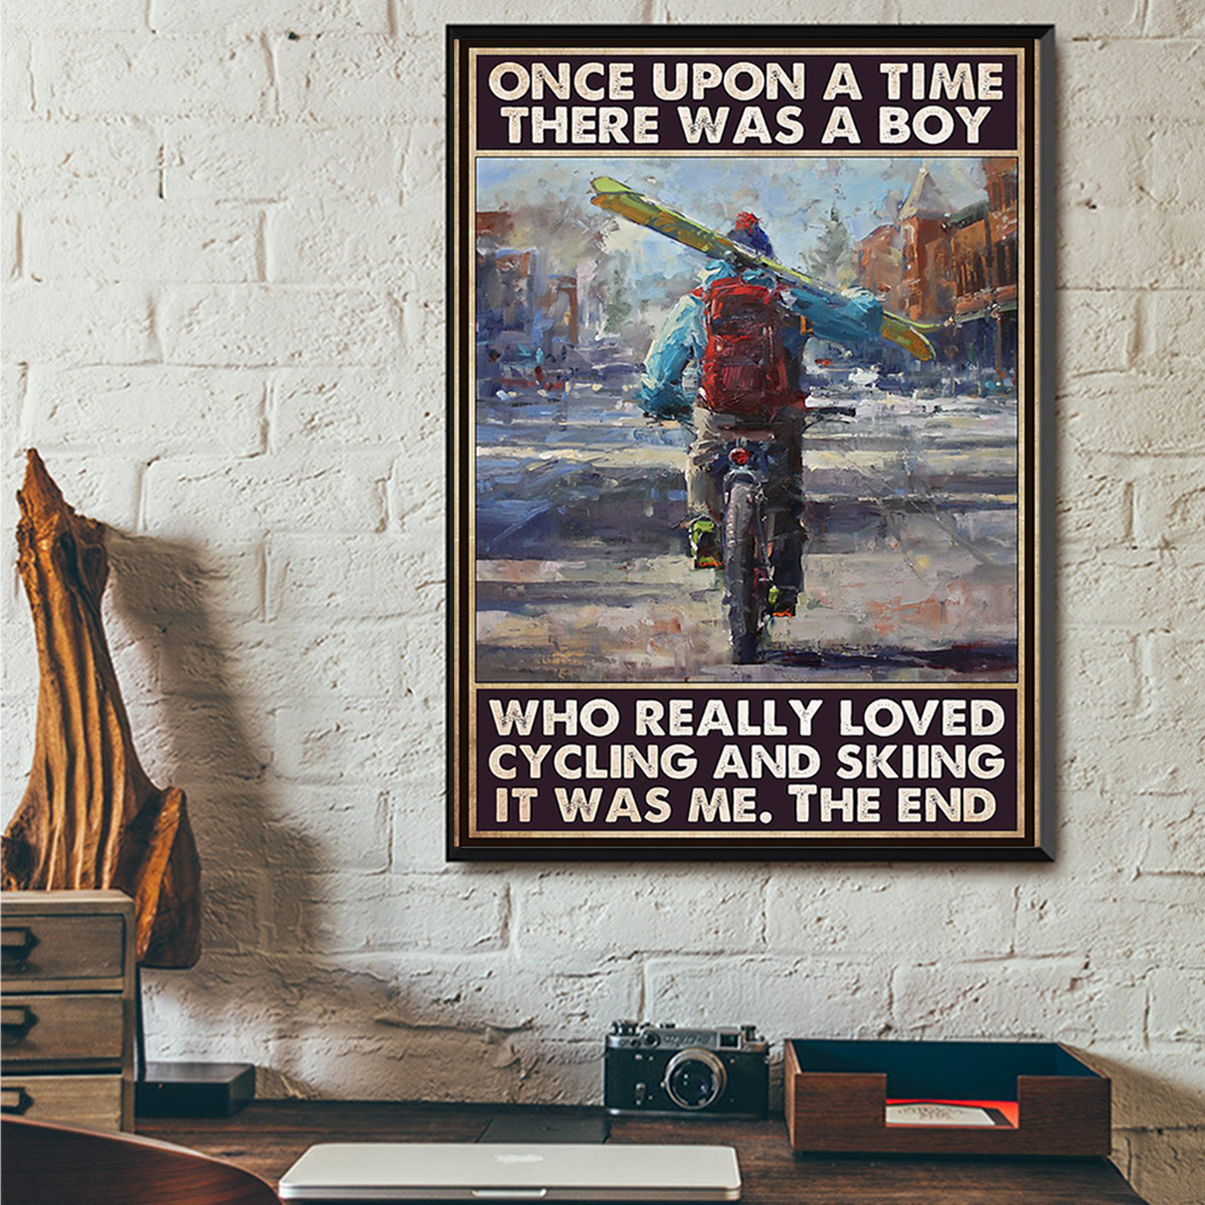 Once upon a time there was a boy who really loved cycling and skiing poster A1